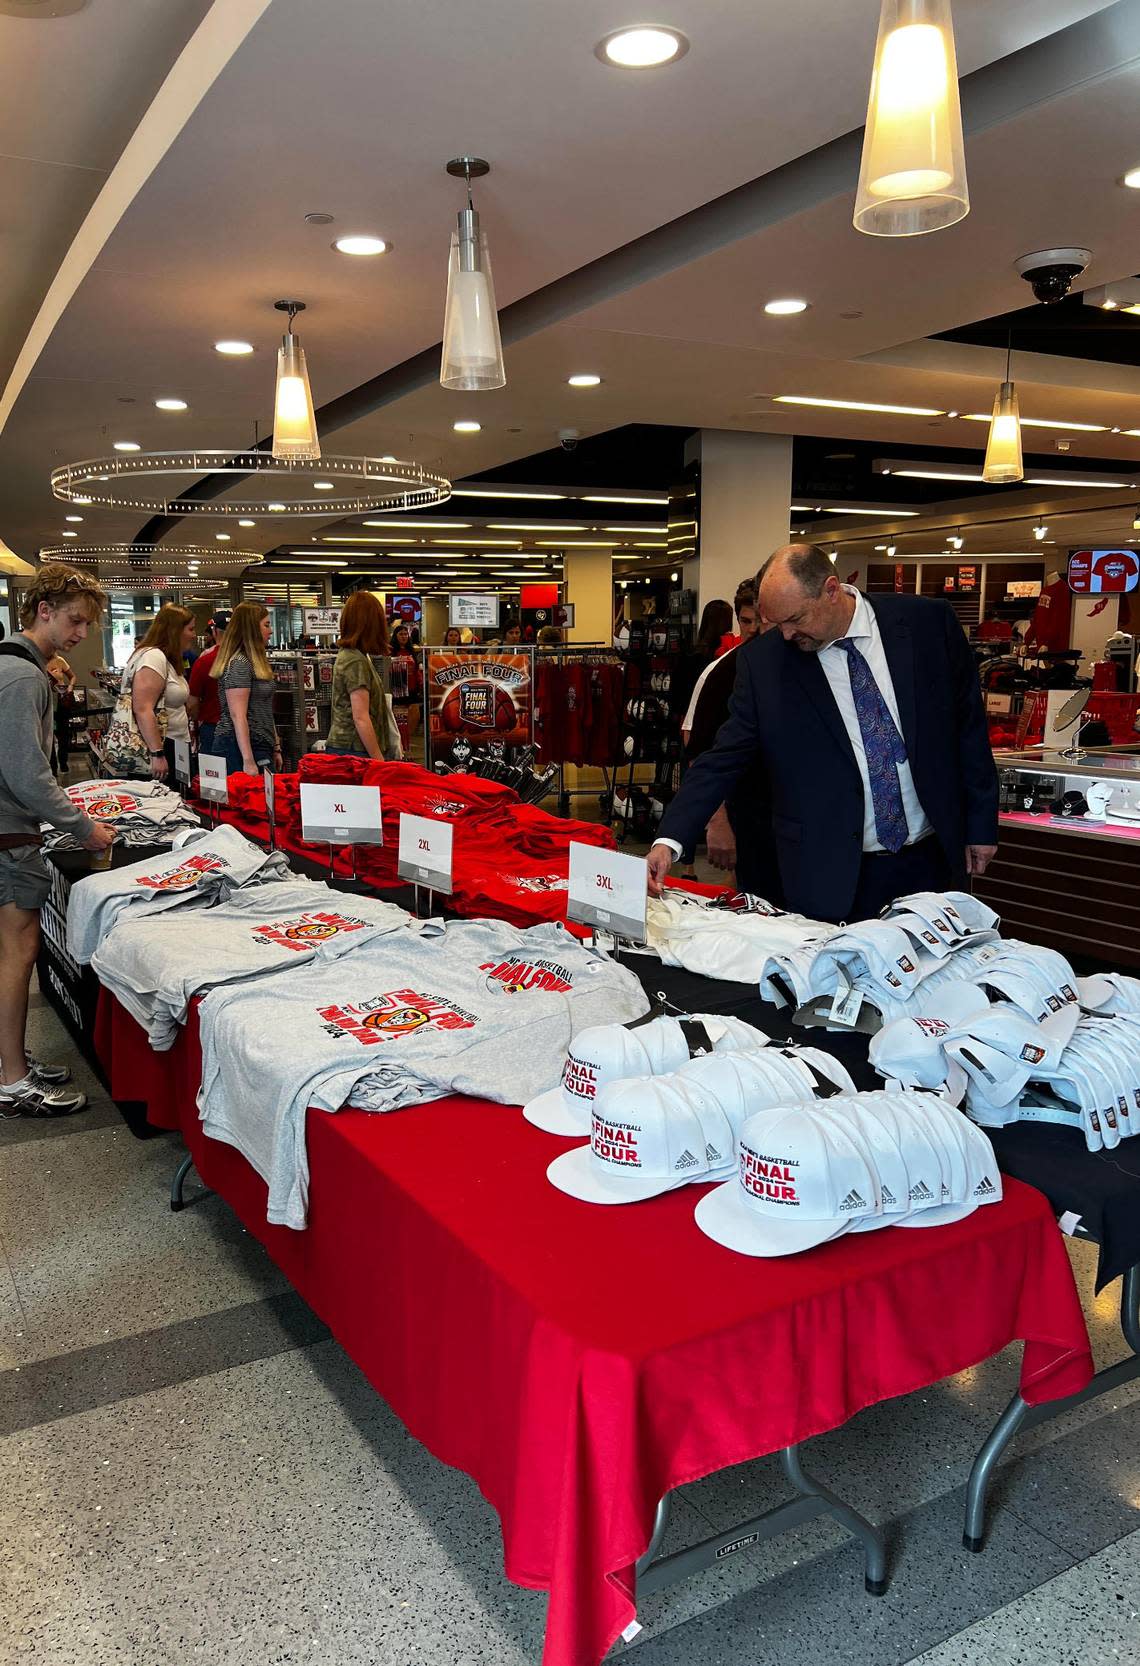 N.C. State University’s campus stores, Wolfpack Outfitters, have set up temporary displays of extra items they’re offering as the men’s and women’s basketball teams play in the NCAA tournament. Jennifer Gilmore/N.C. State University